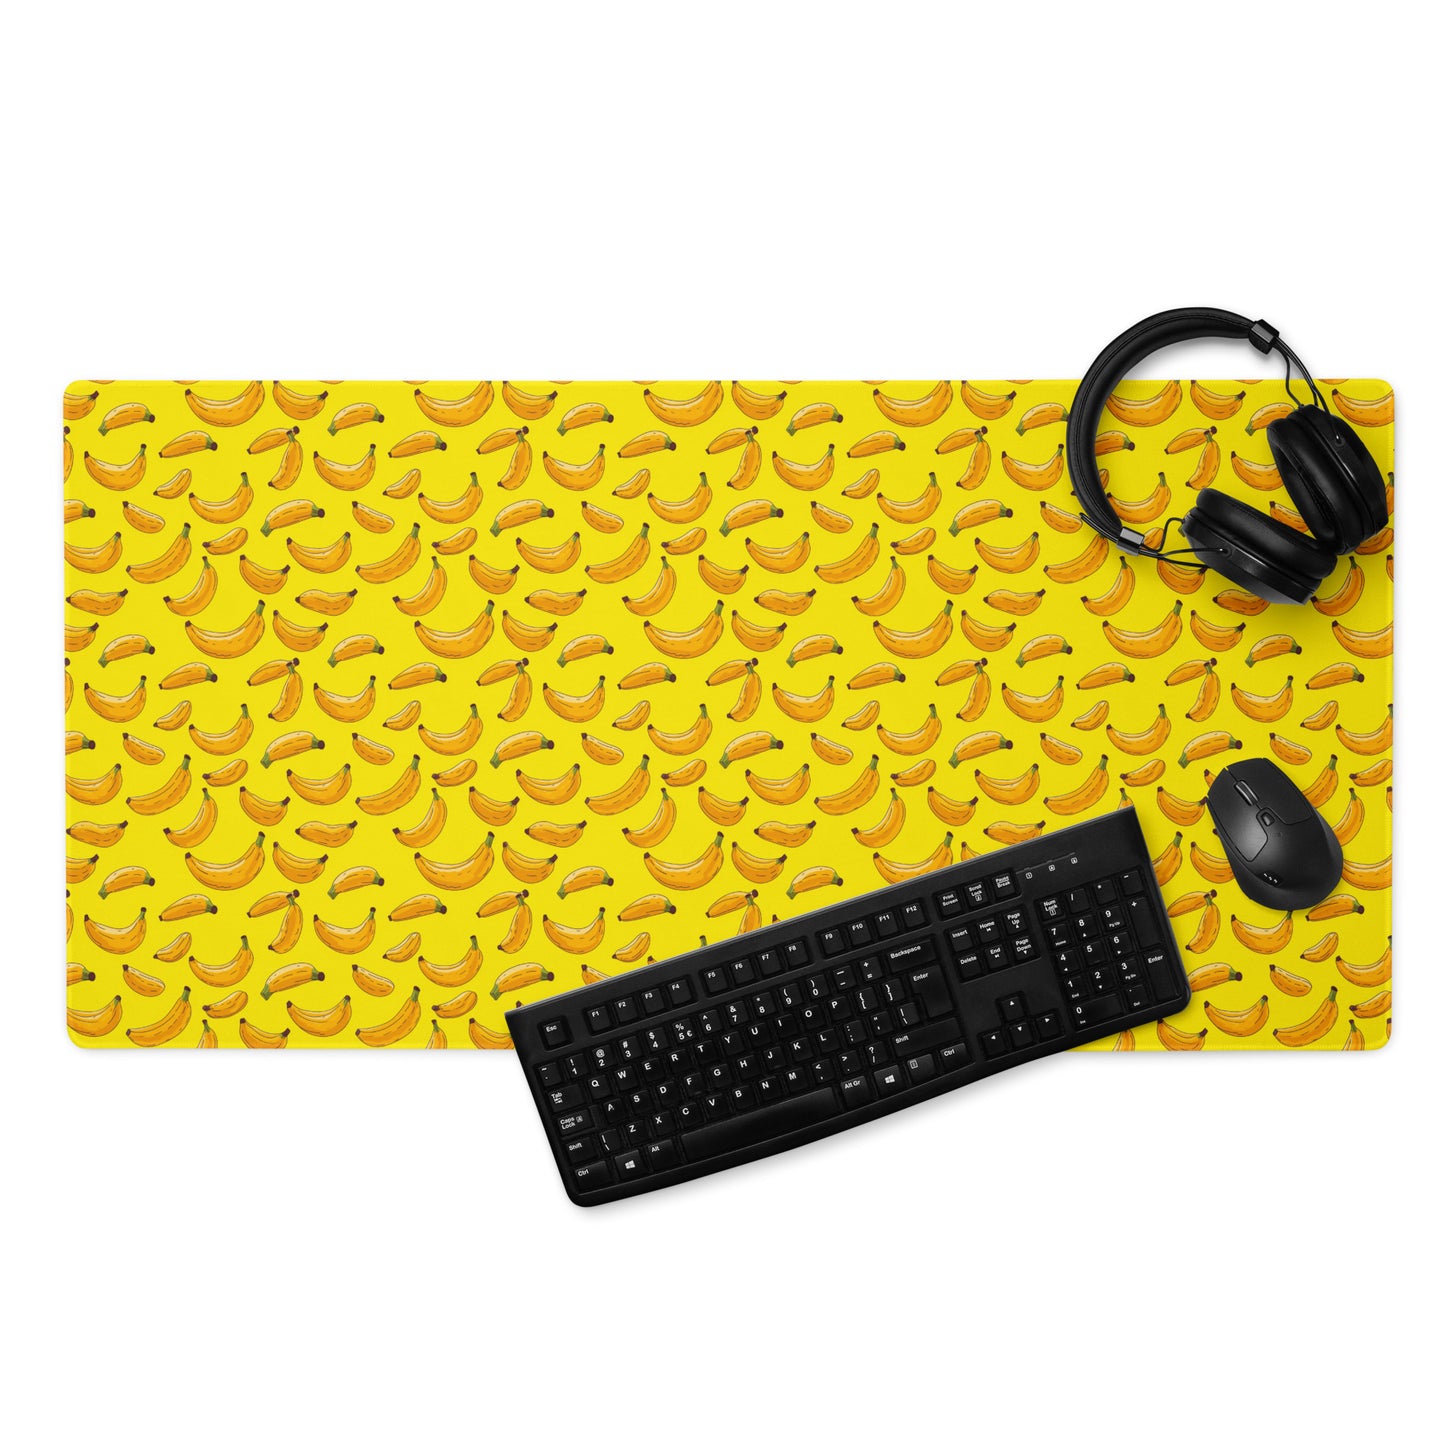 A 36" x 18" desk pad with bananas all over it displayed with a keyboard, headphones and a mouse on it. Yellow in color.